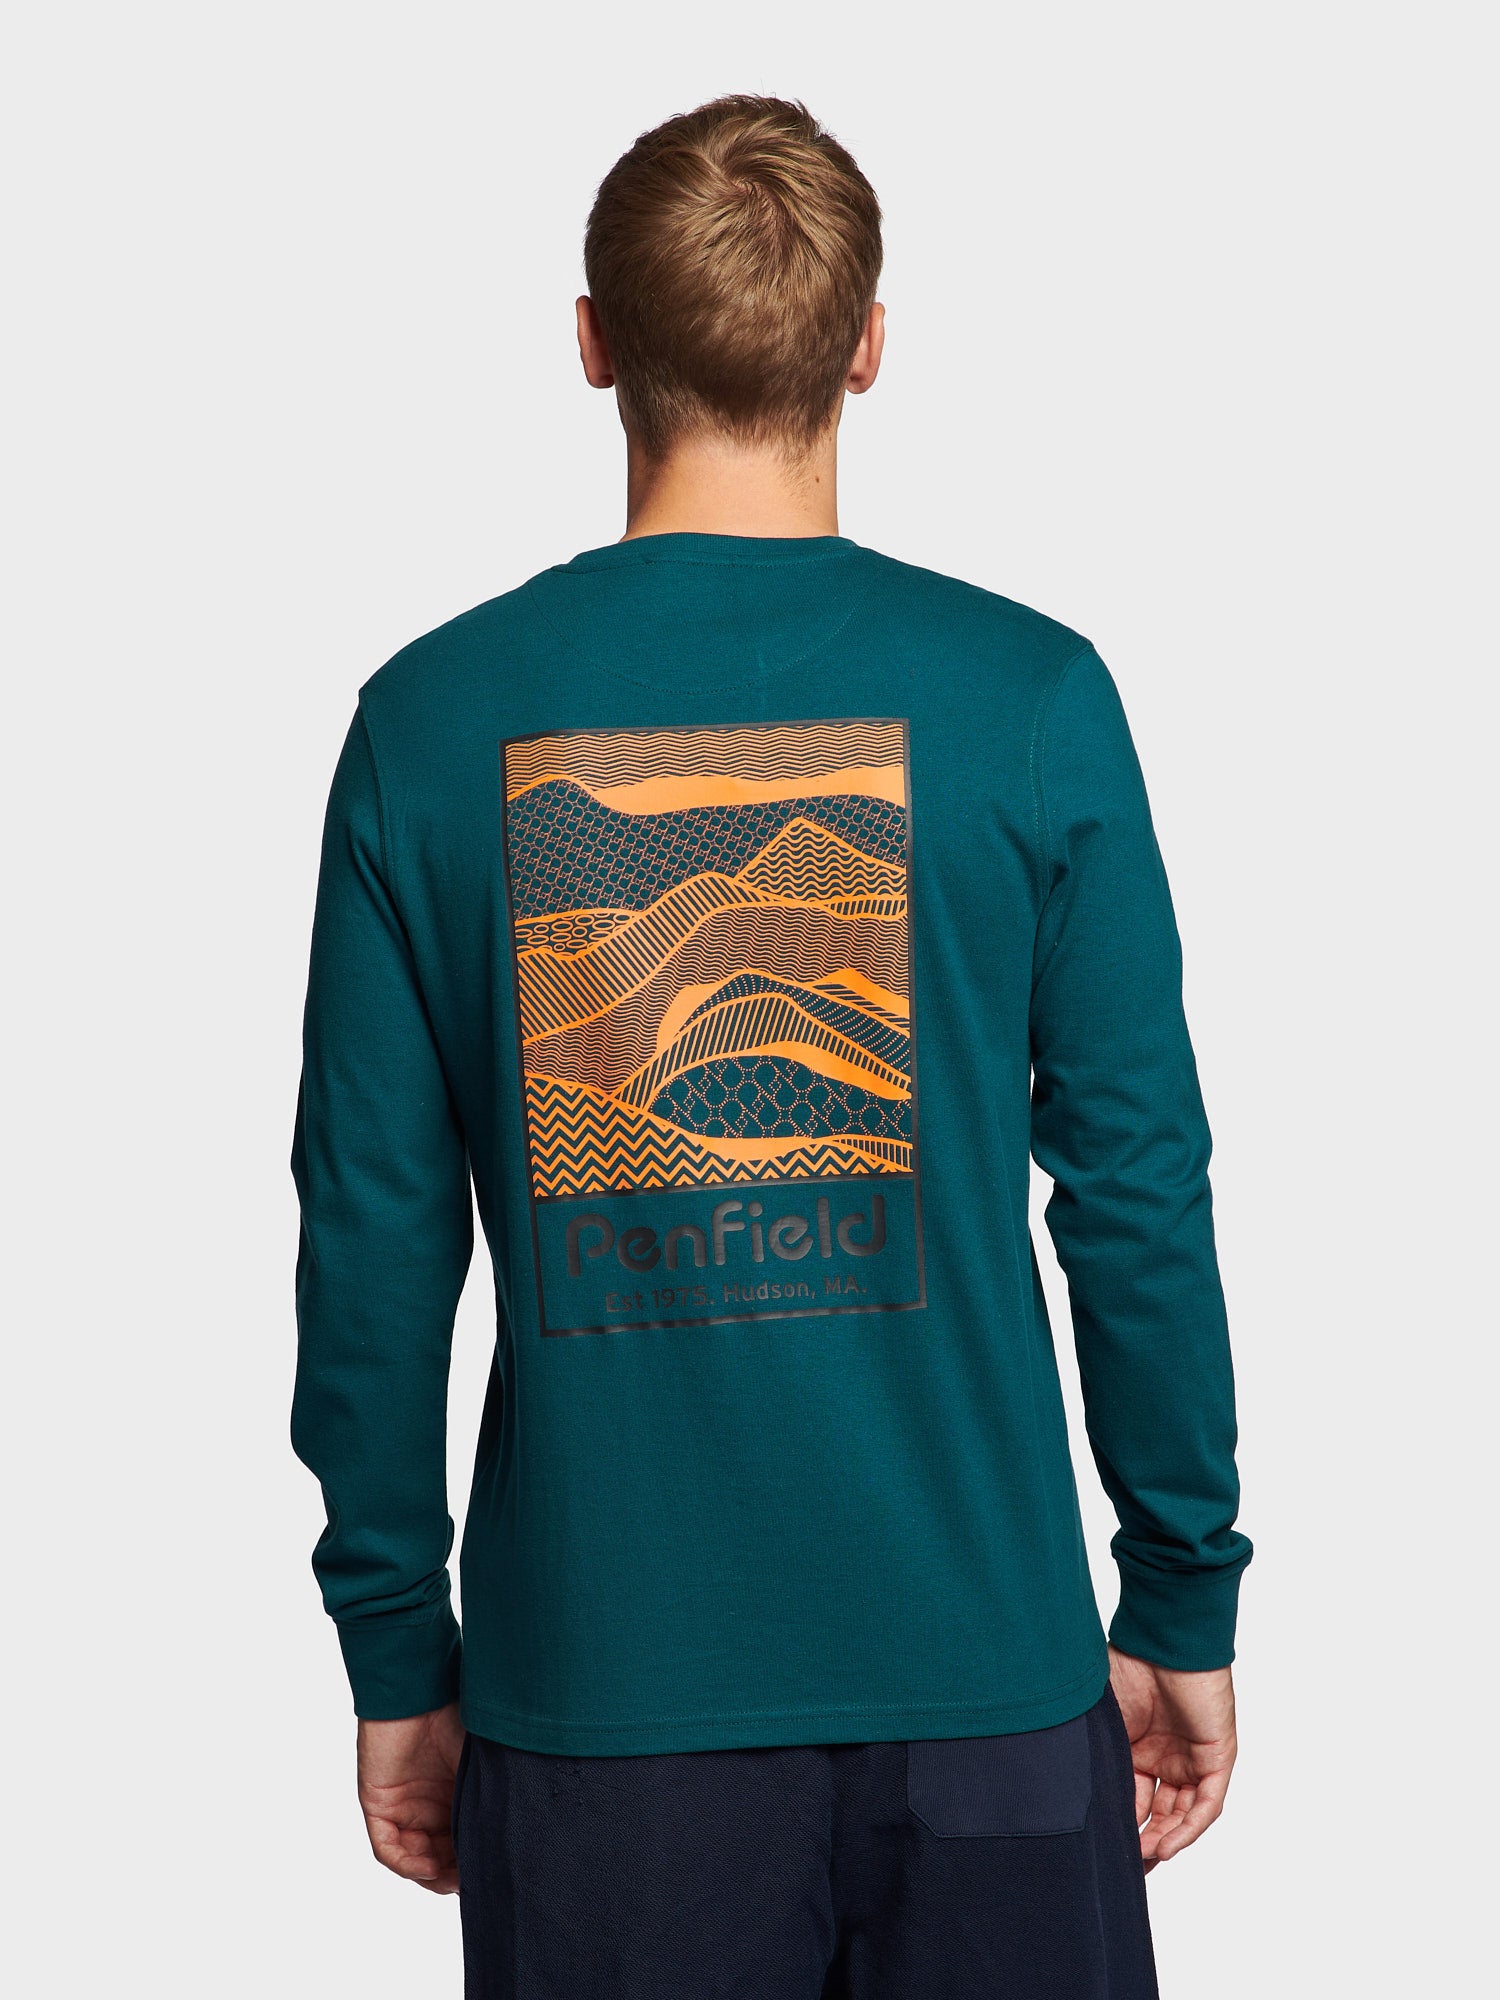 Sketch Mountain Back Graphic Long Sleeve T-Shirt in Deep Teal